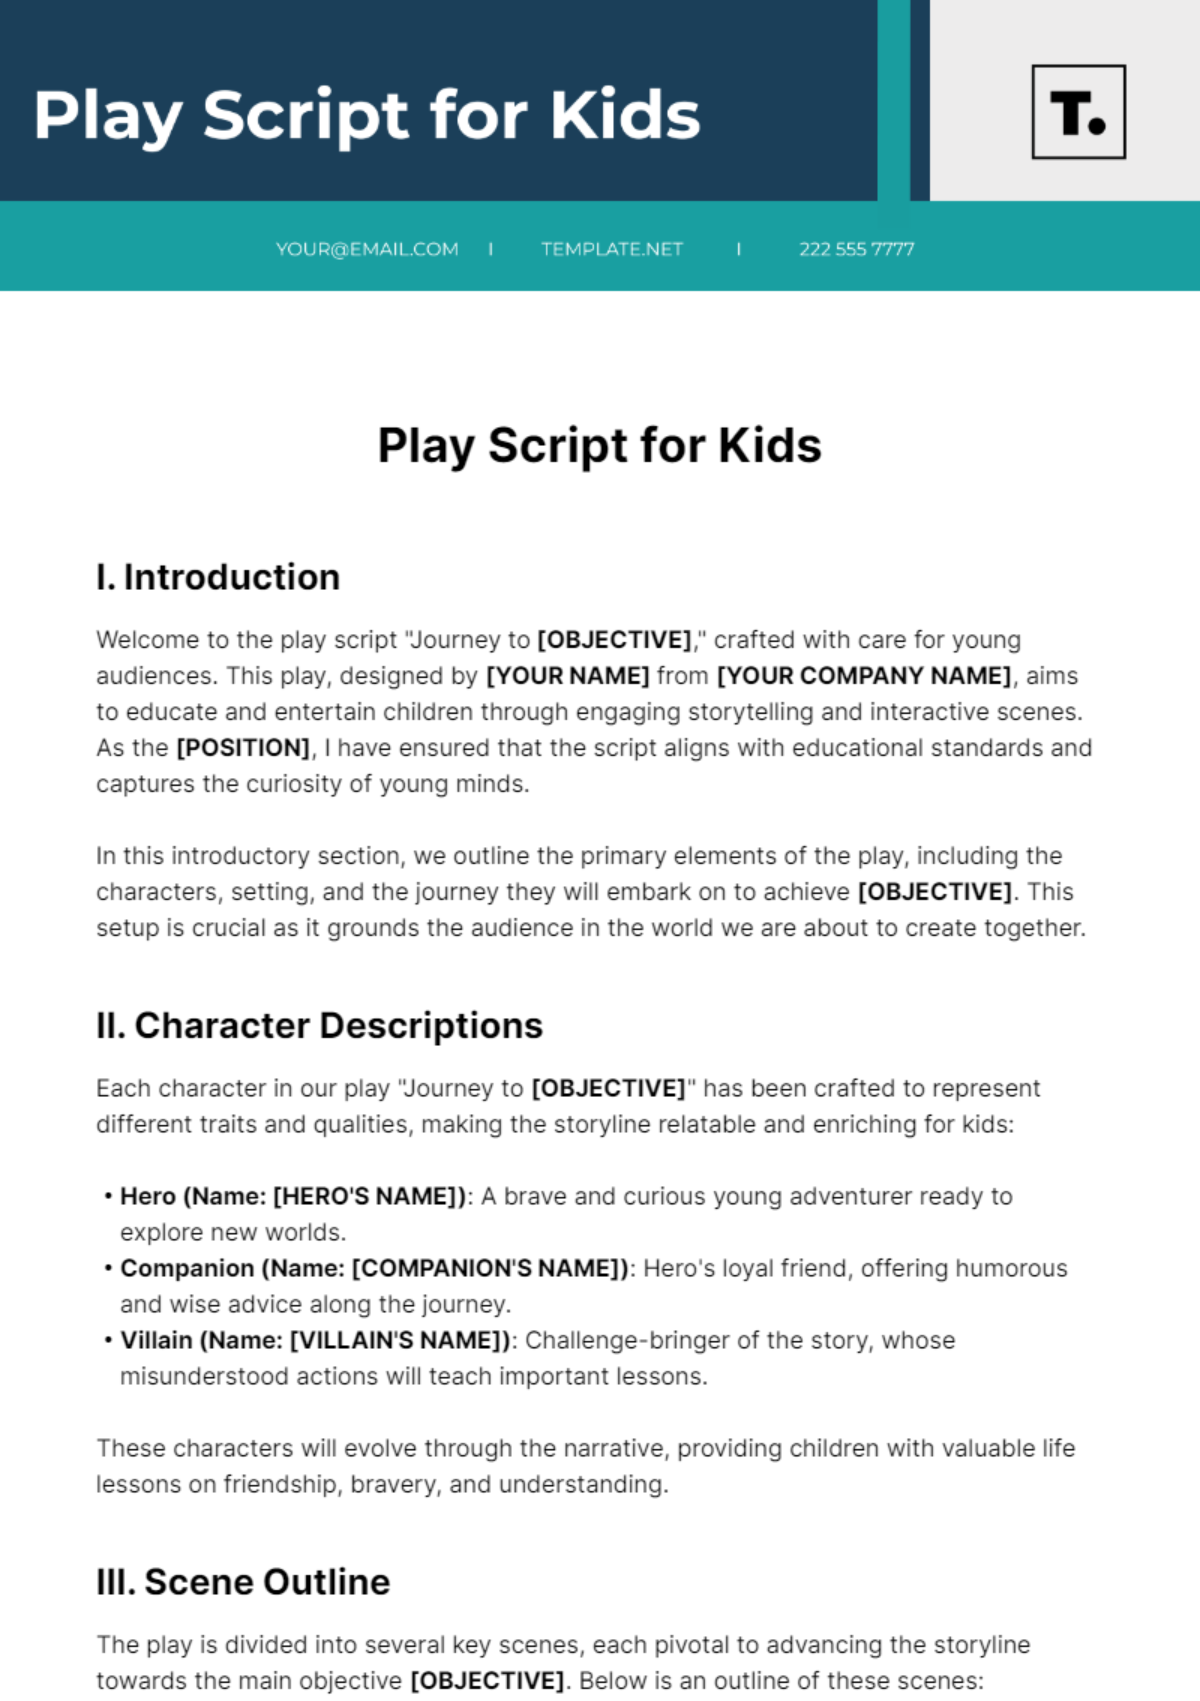 Play Script For Kids Template